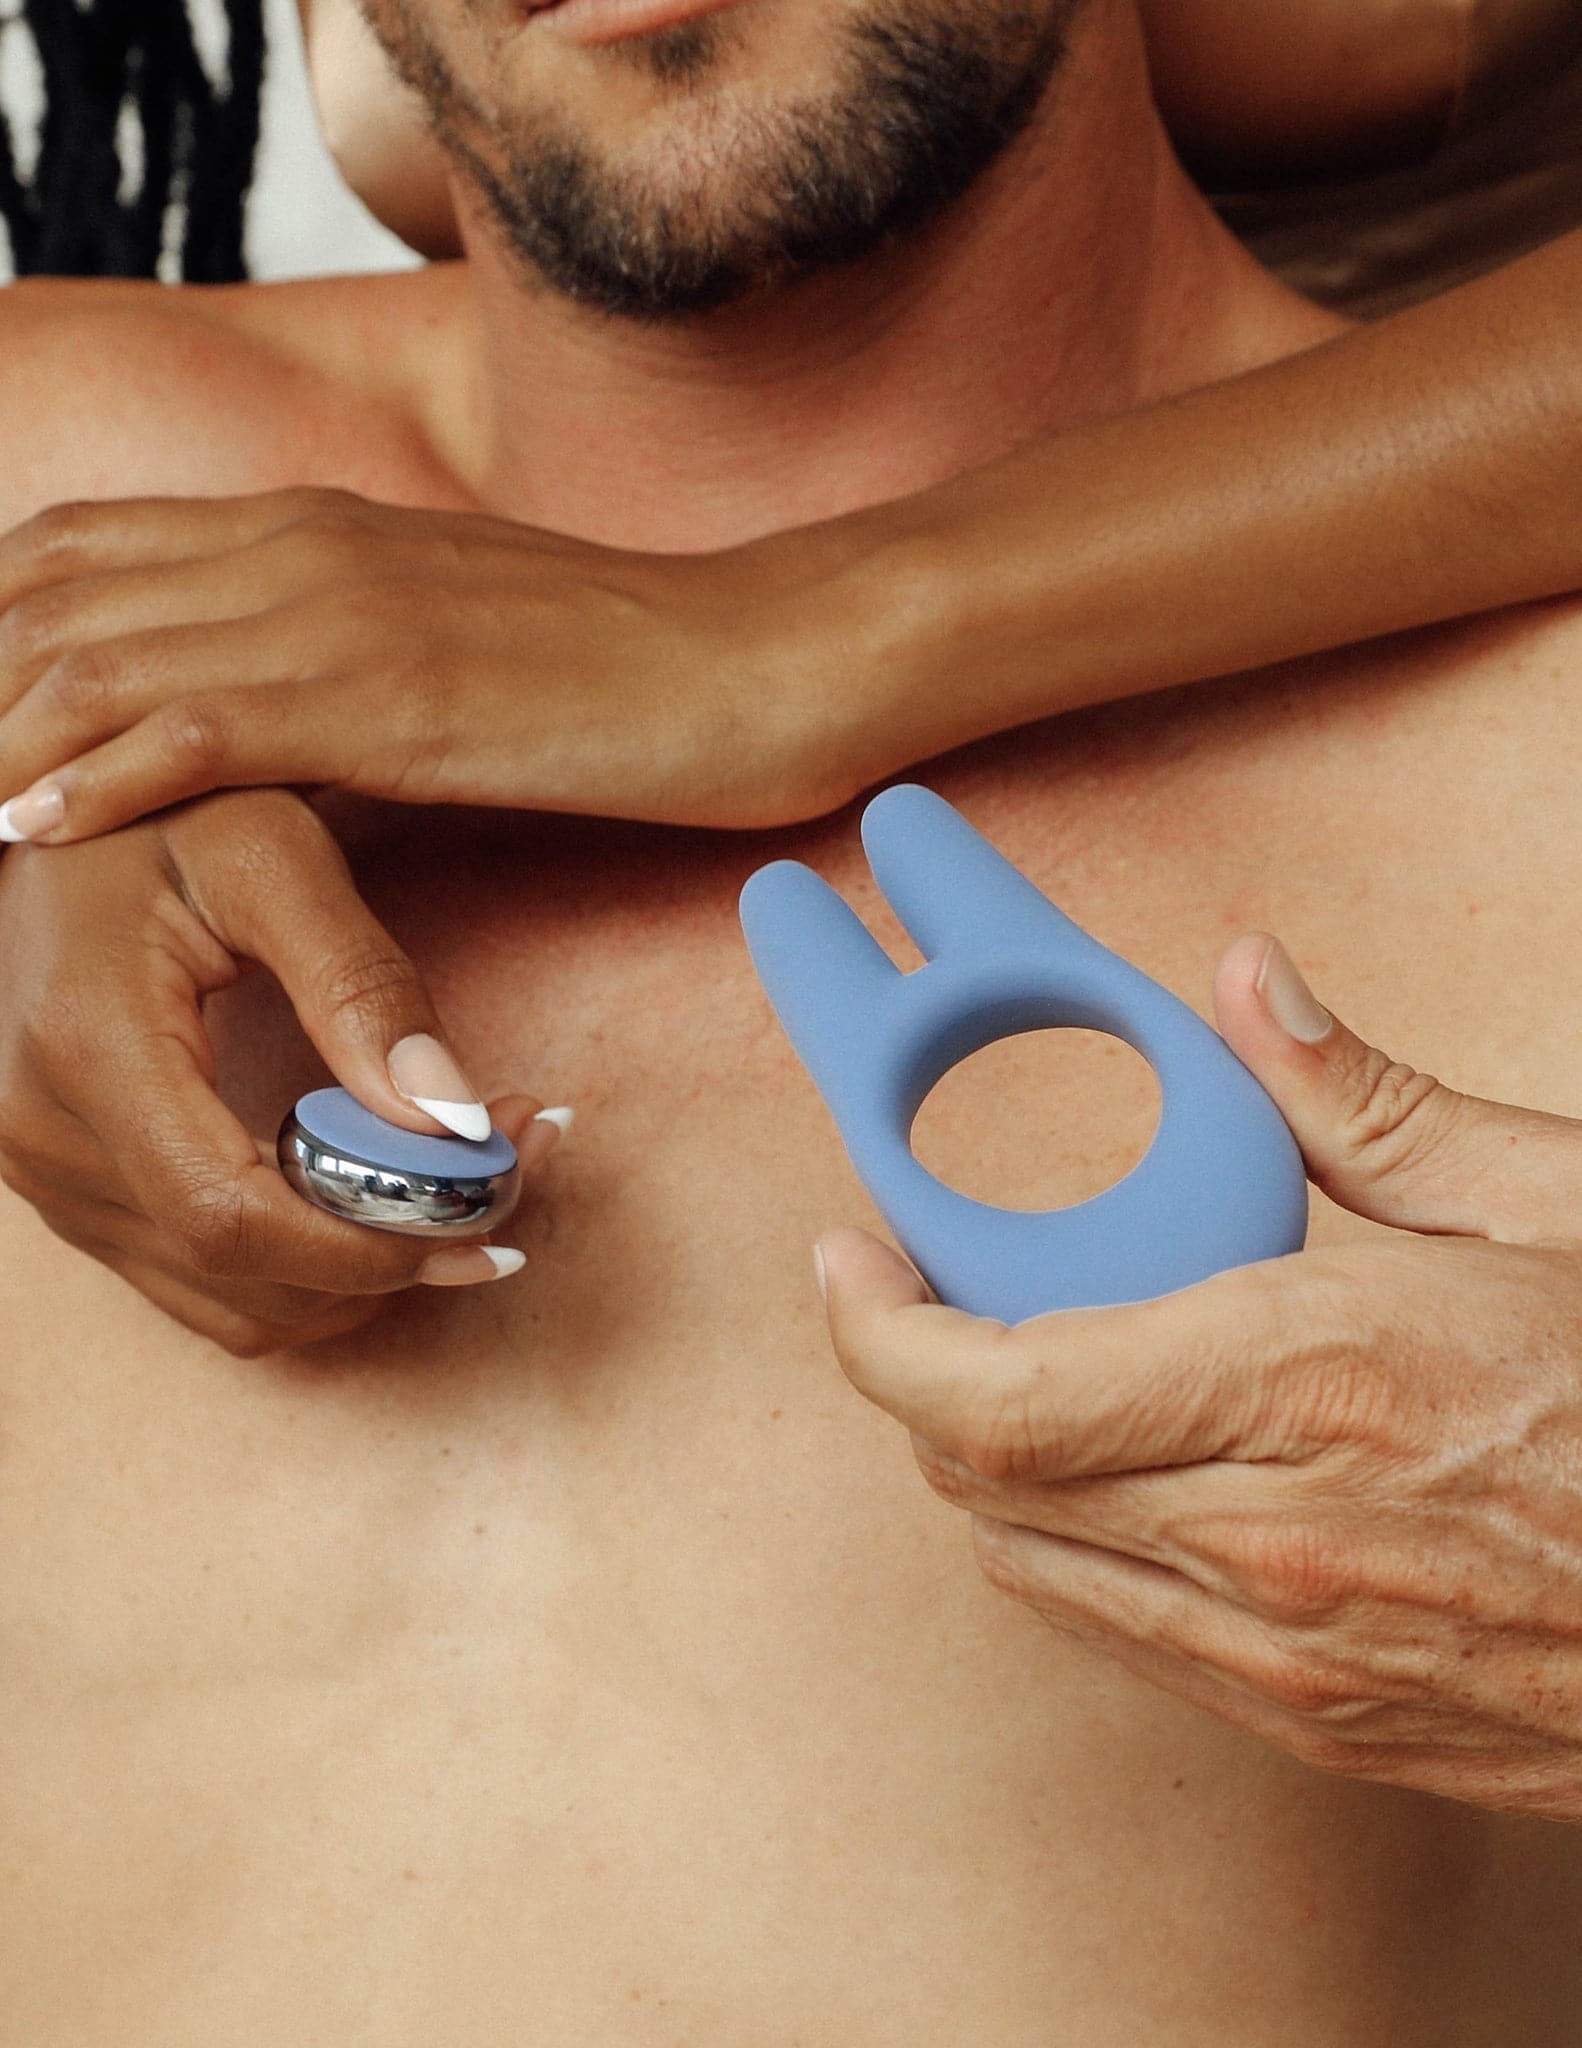 Couple holding the remote control silicone penis ring with two prong rabbit ears 